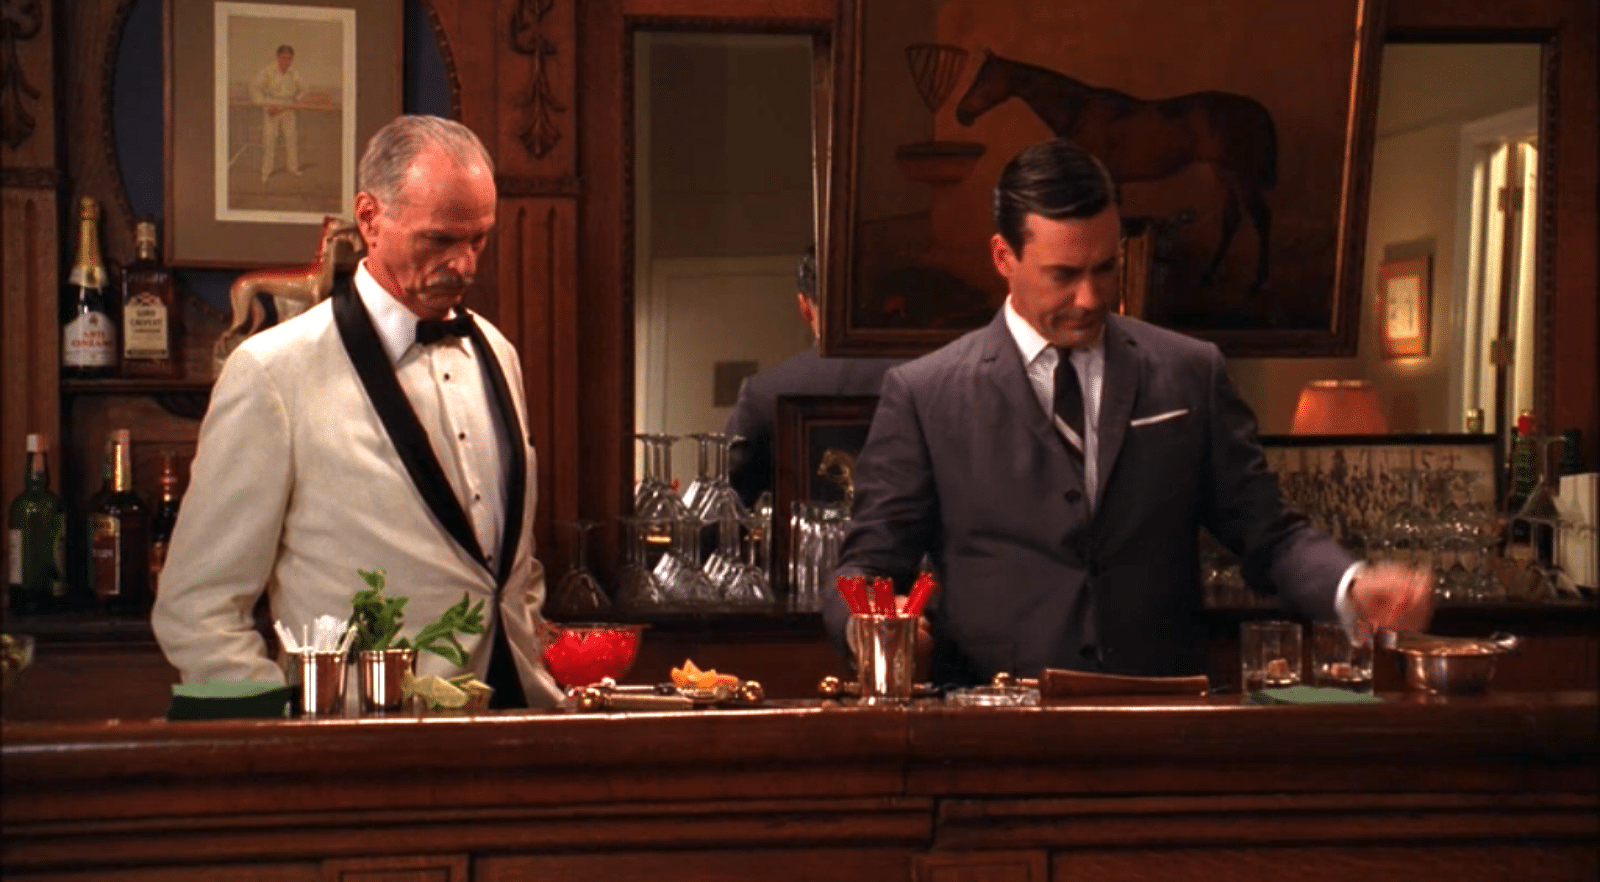 Conrad Hilton makes his appearance. He and Don get to know one another while hiding out behind a bar during a weekend party. Don doesn't yet know that the father of modern hotels will become a father figure of sorts for the rest of the season.